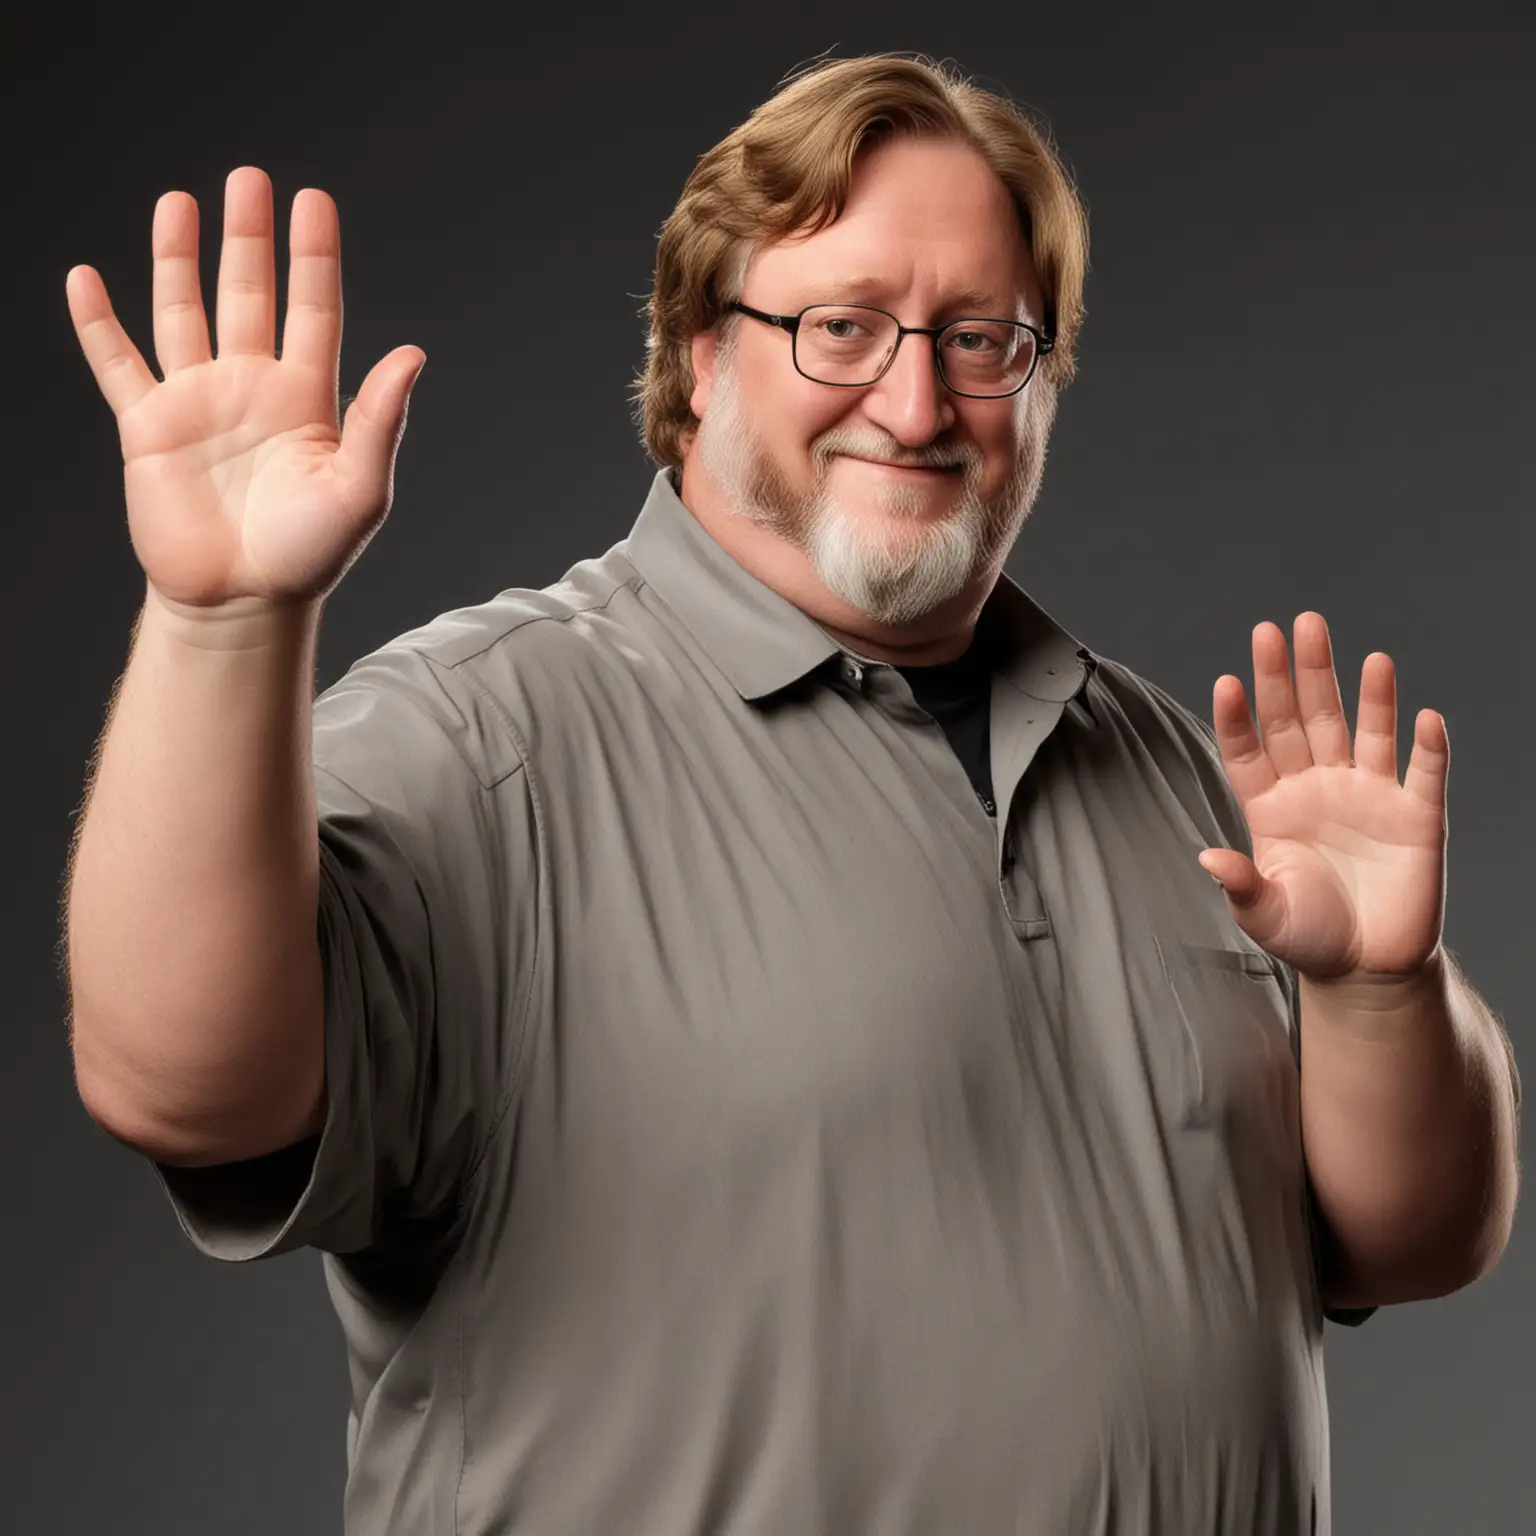 Gabe Newell Waves Hand in Friendly Greeting